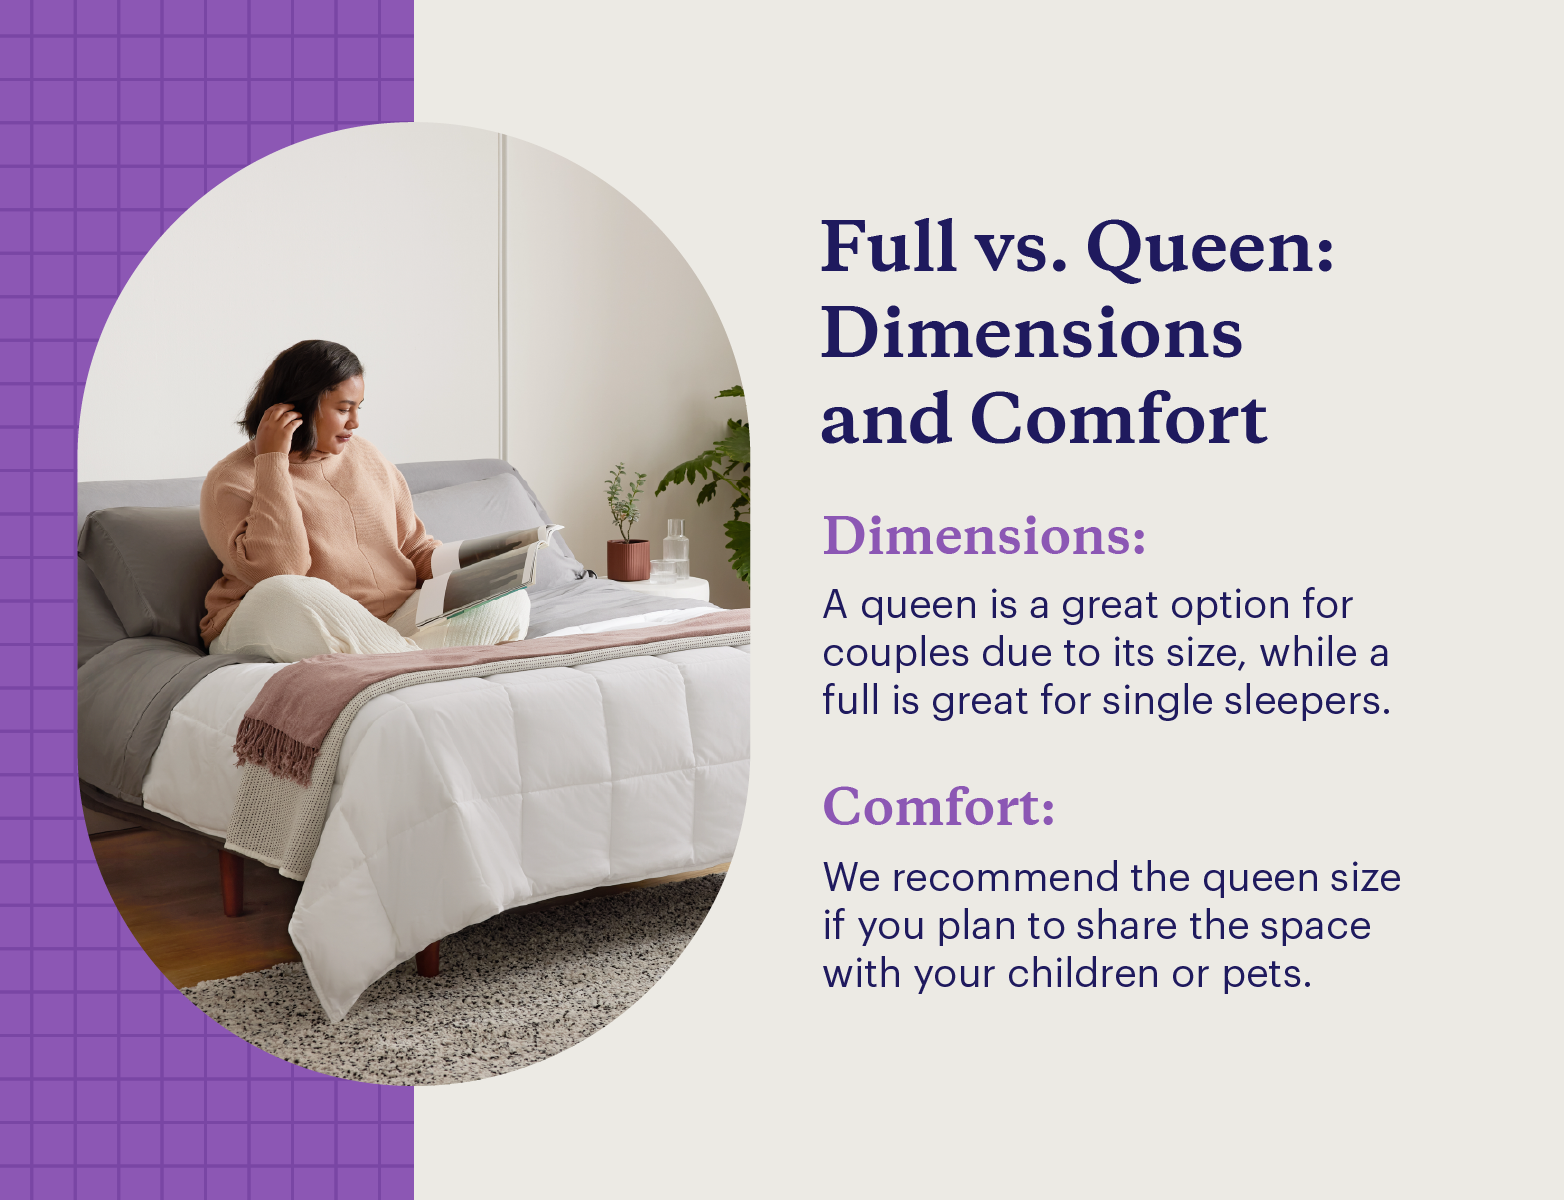 Comparison between when to choose a full vs queen depending on size and comfort.